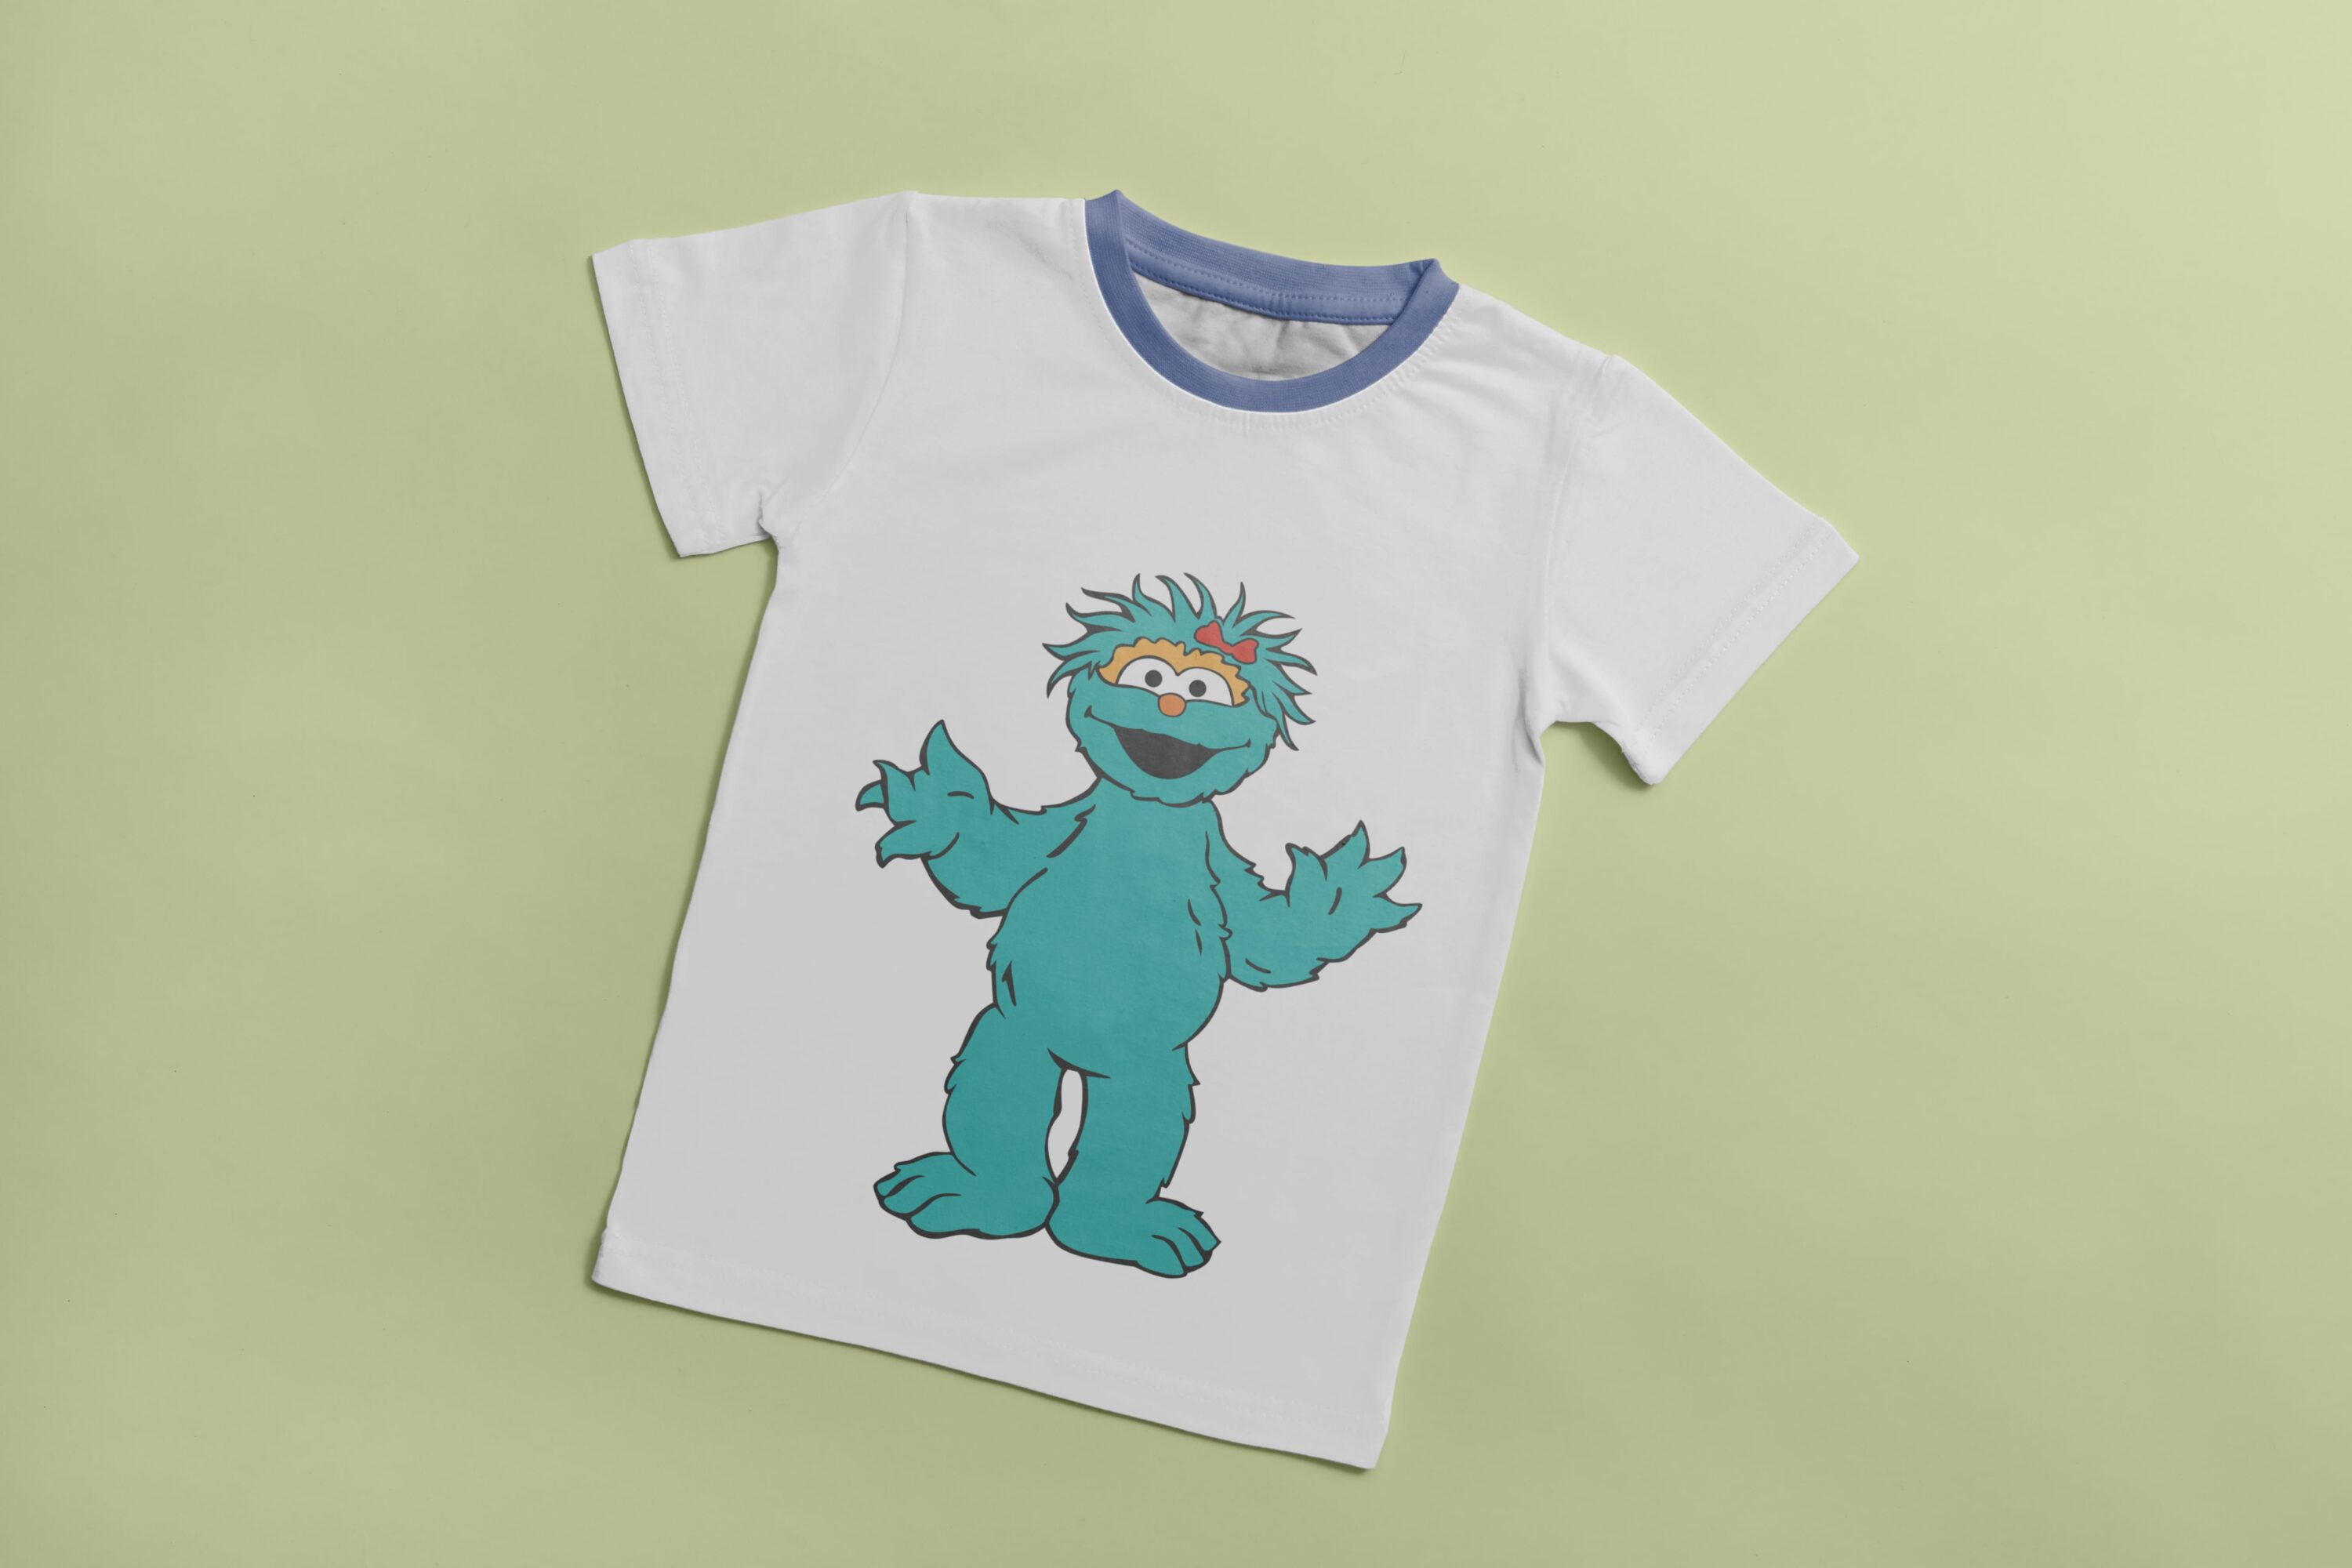 White T-shirt with a blue collar and an image of a turquoise smiling Cookie Monster.